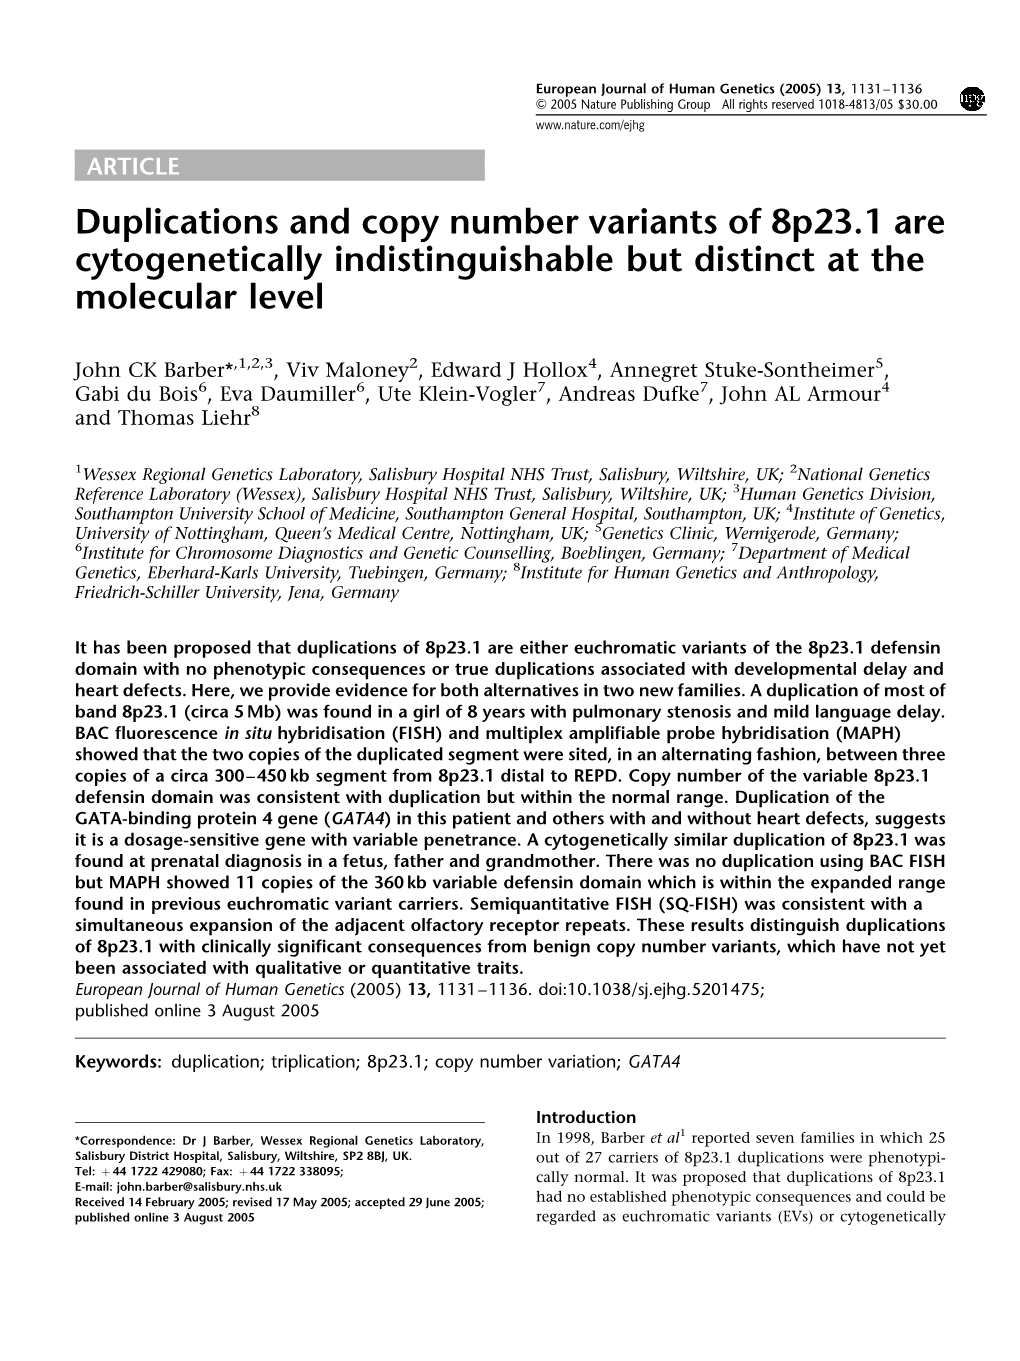 Duplications and Copy Number Variants of 8P23.1 Are Cytogenetically Indistinguishable but Distinct at the Molecular Level